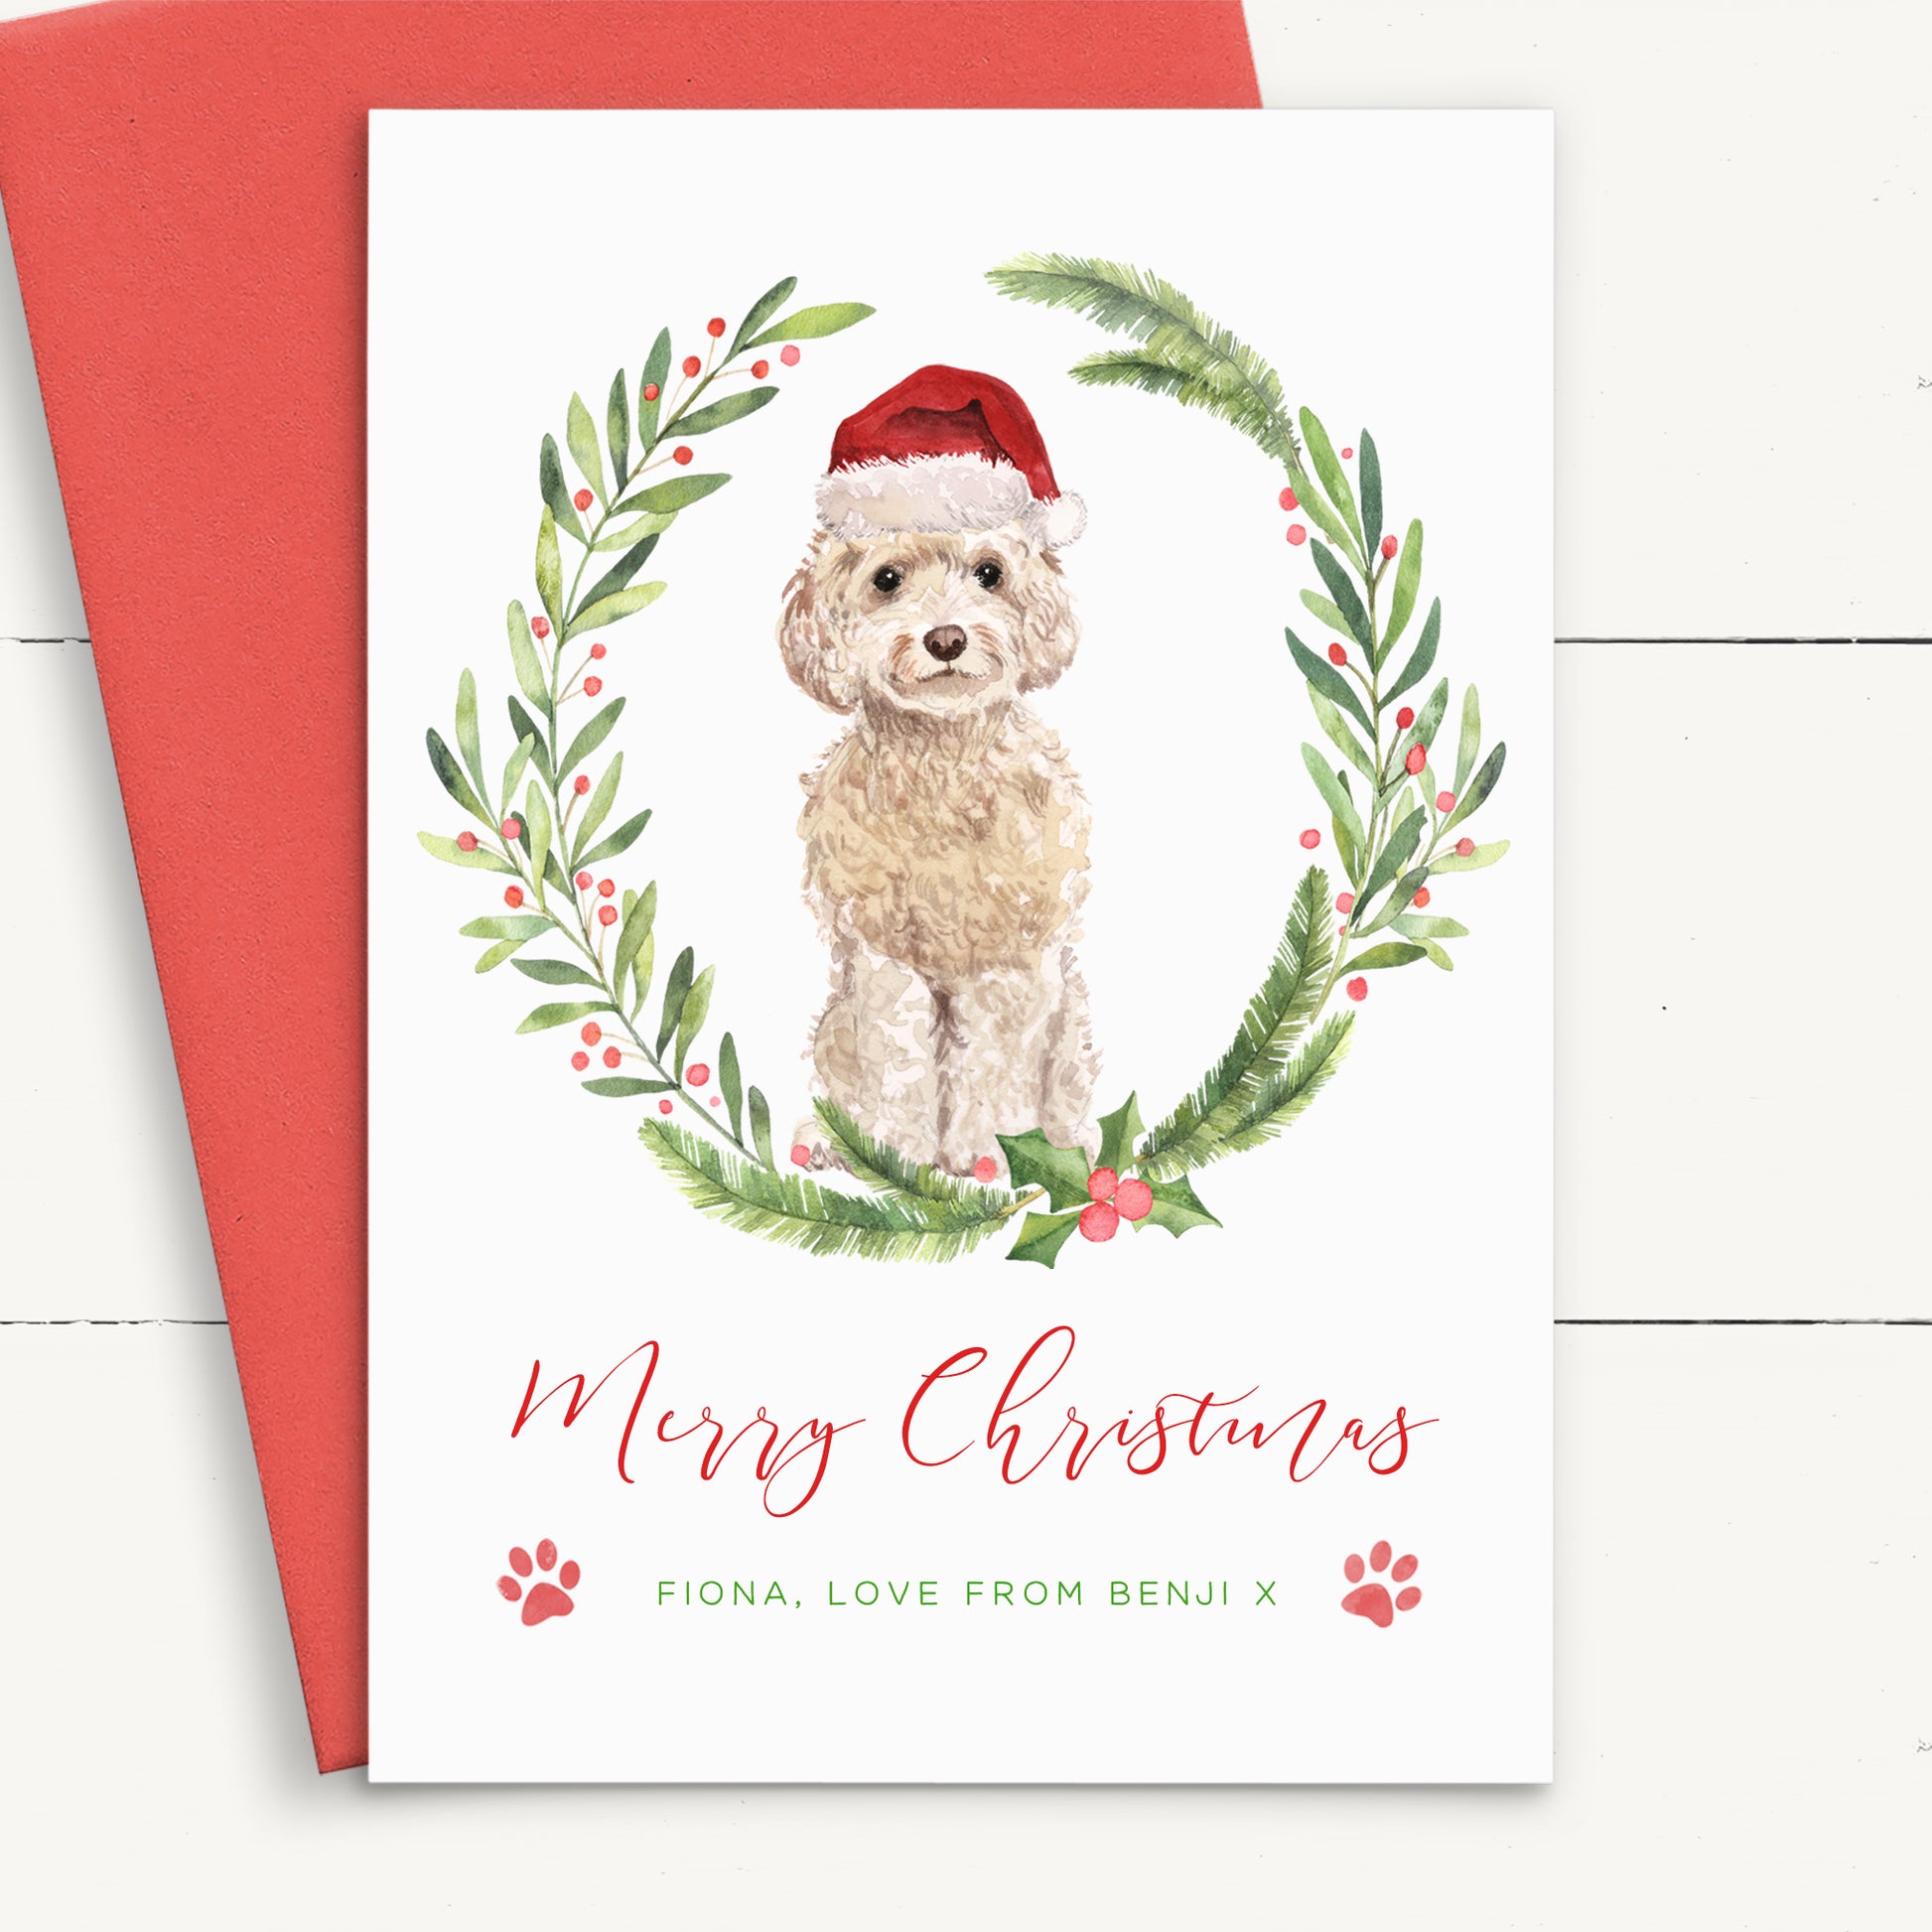 cockapoo personalised christmas card from dog red envelope matte white smooth cardstocl